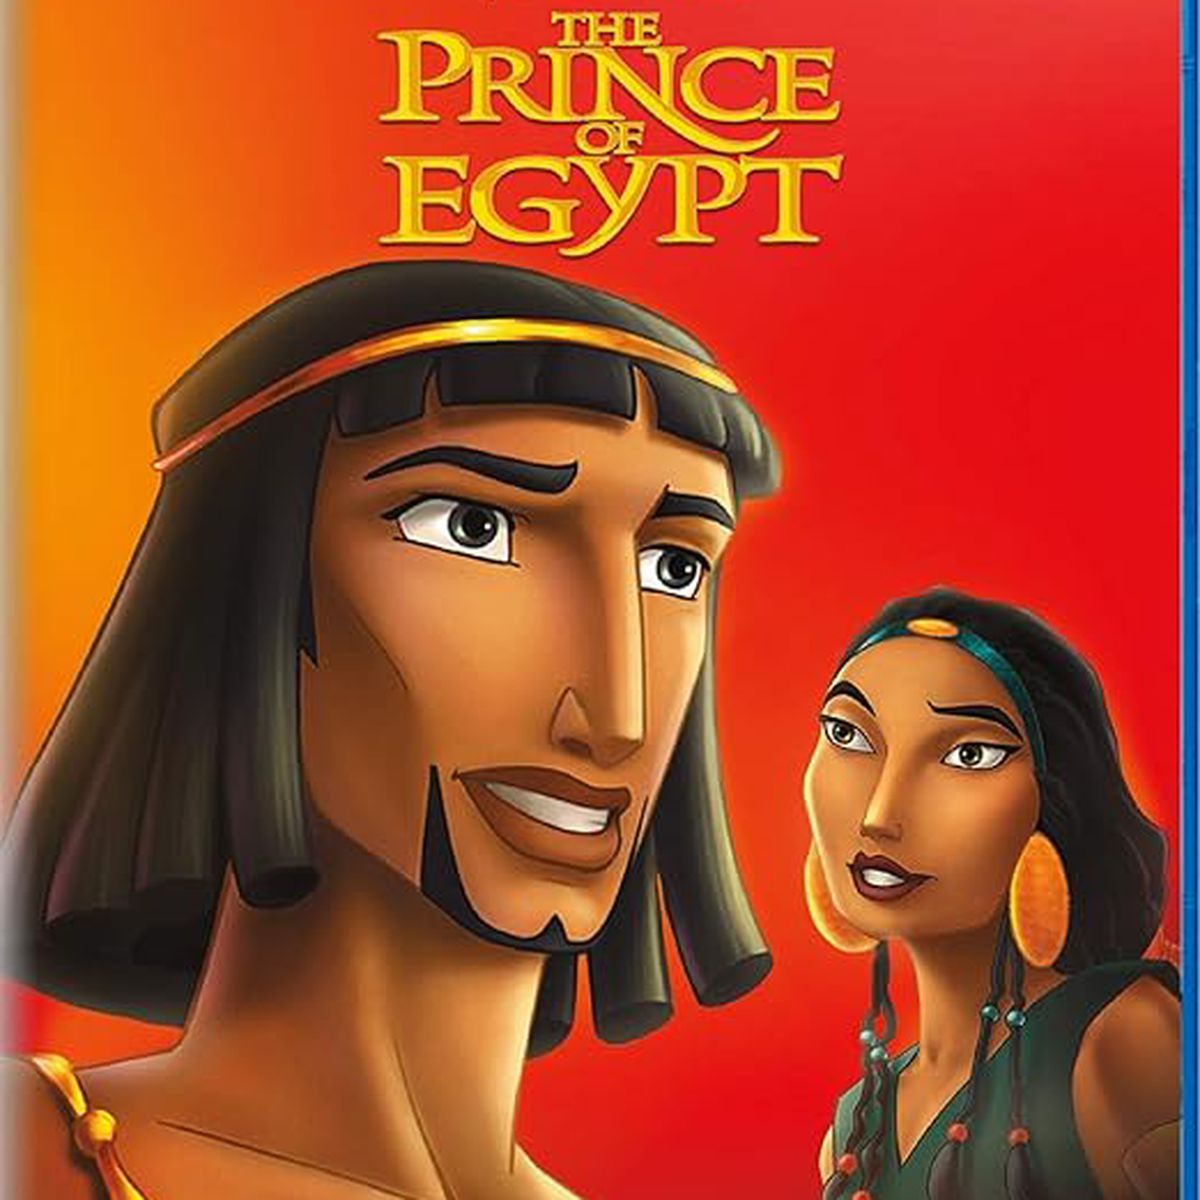 A Blu-Ray case featuring Moses from The Prince of Egypt